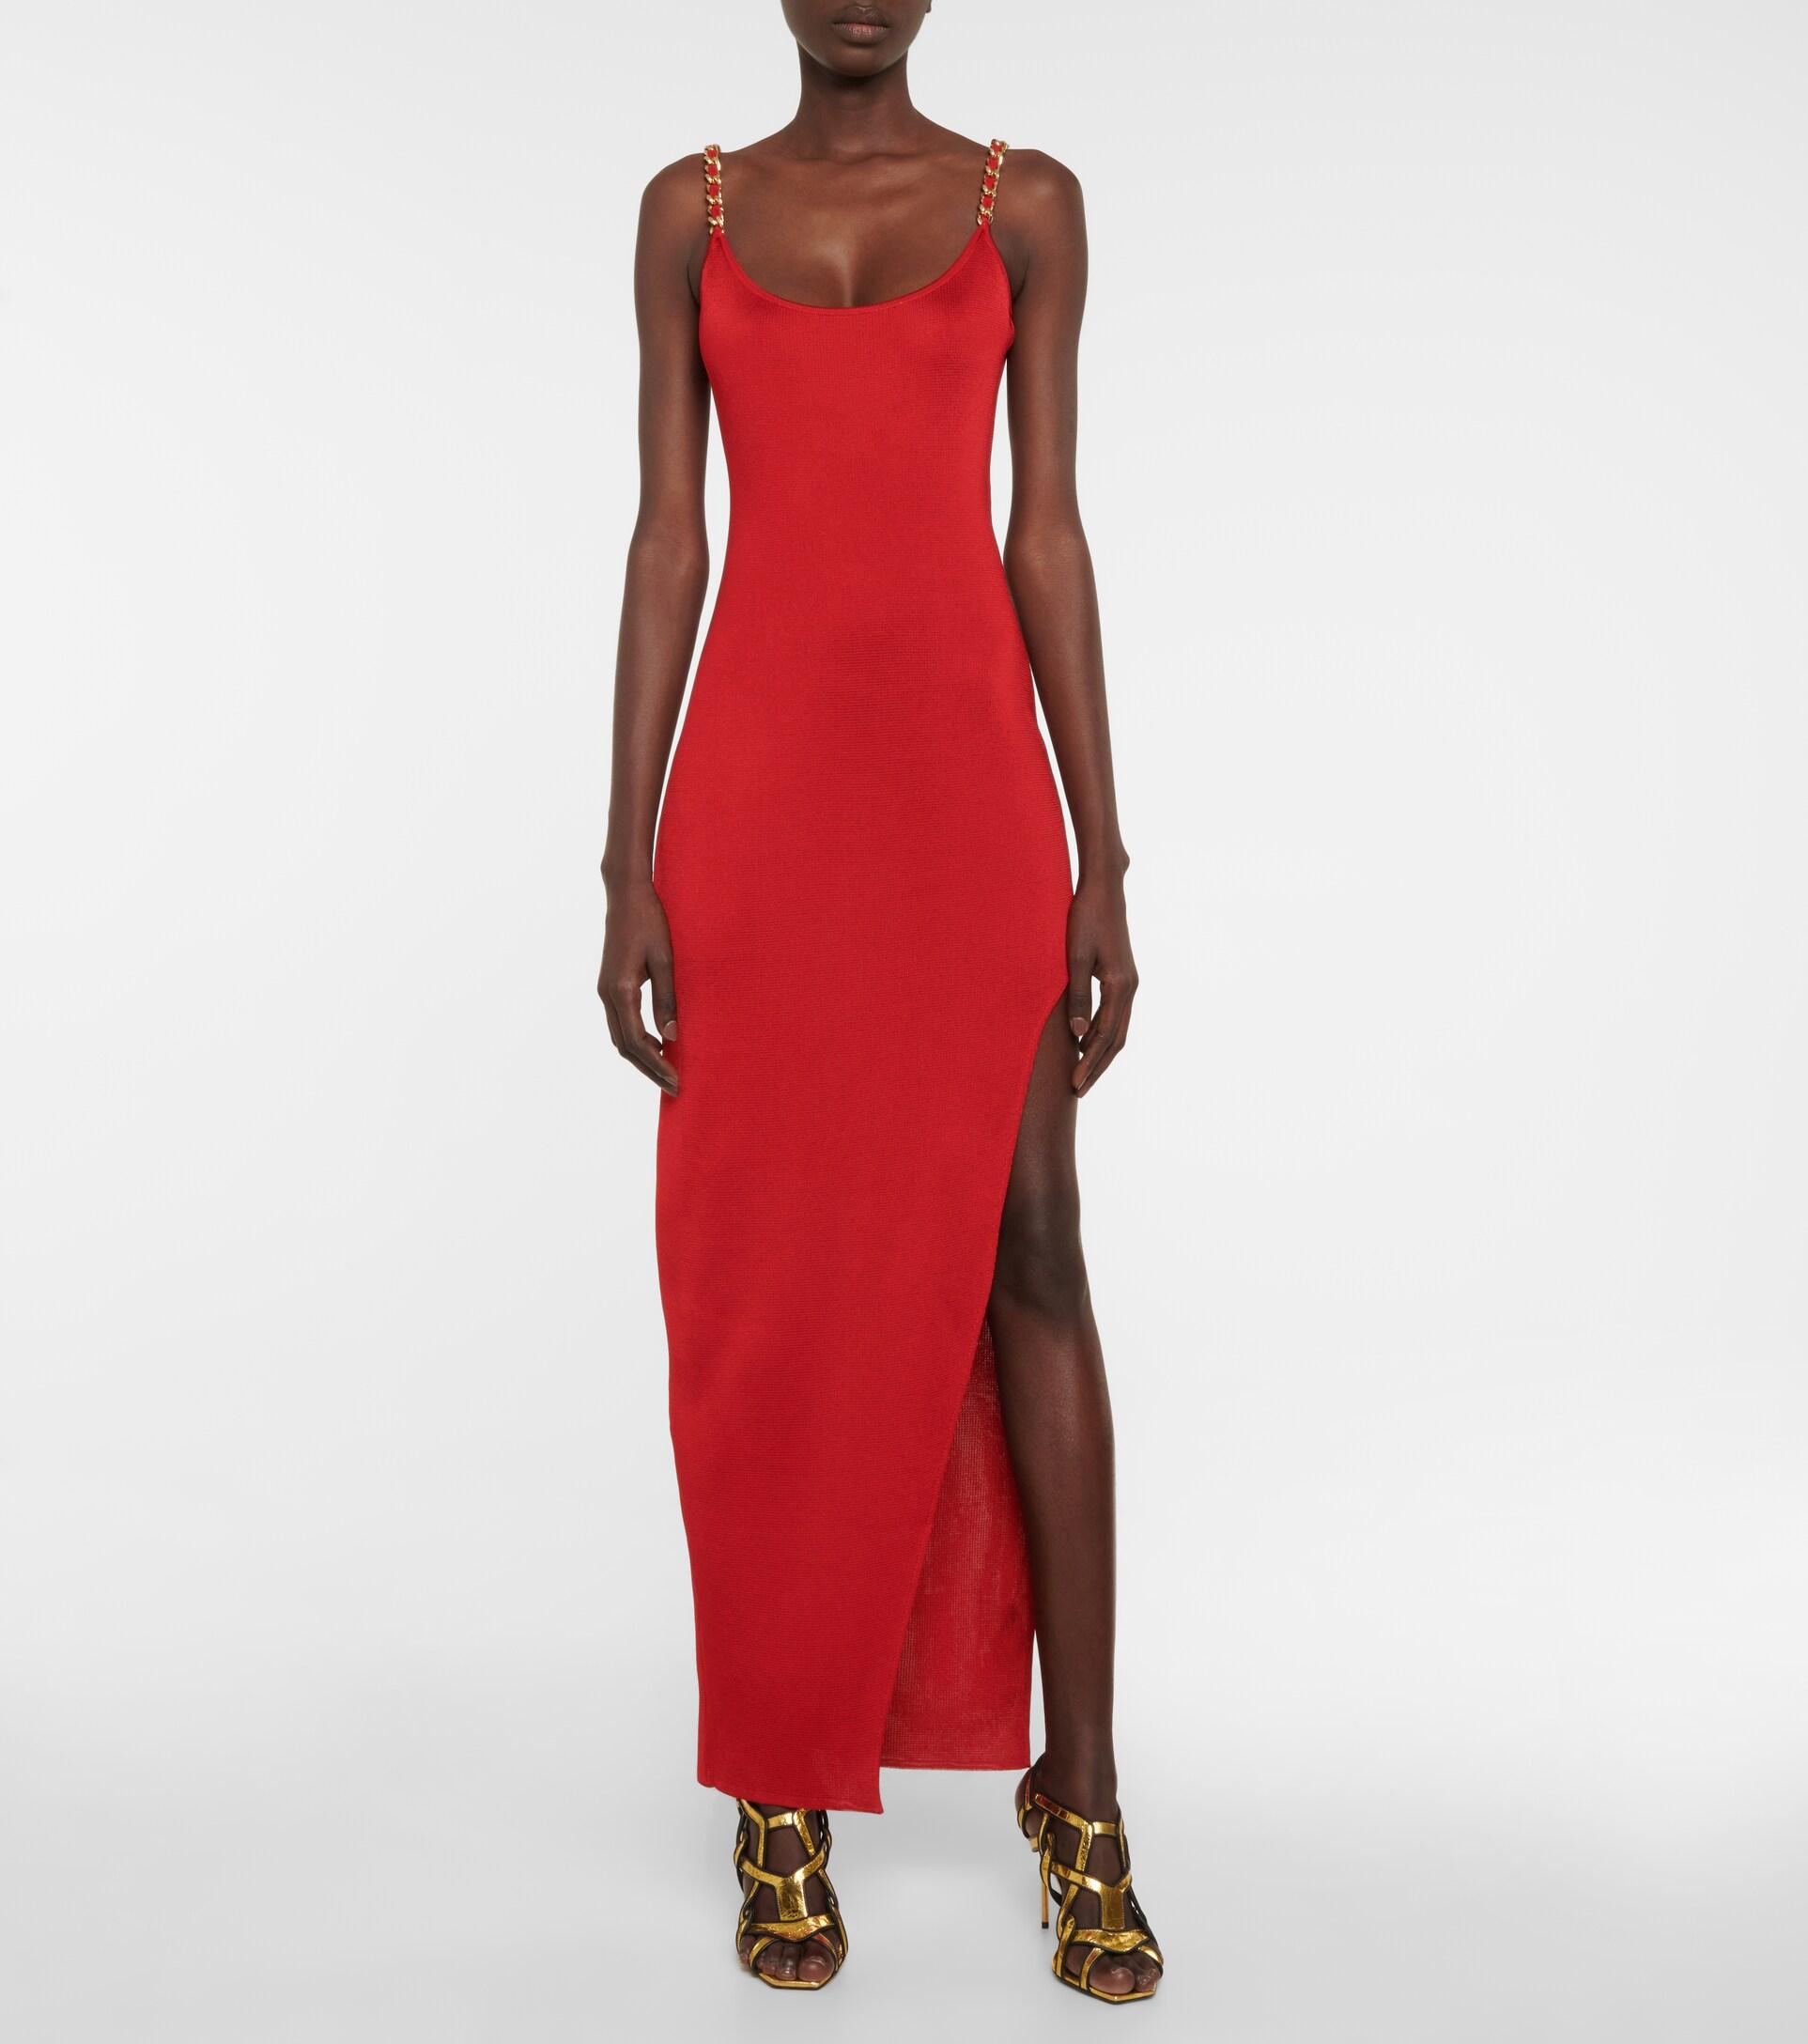 Balmain Synthetic Embellished Slip Dress in Red | Lyst